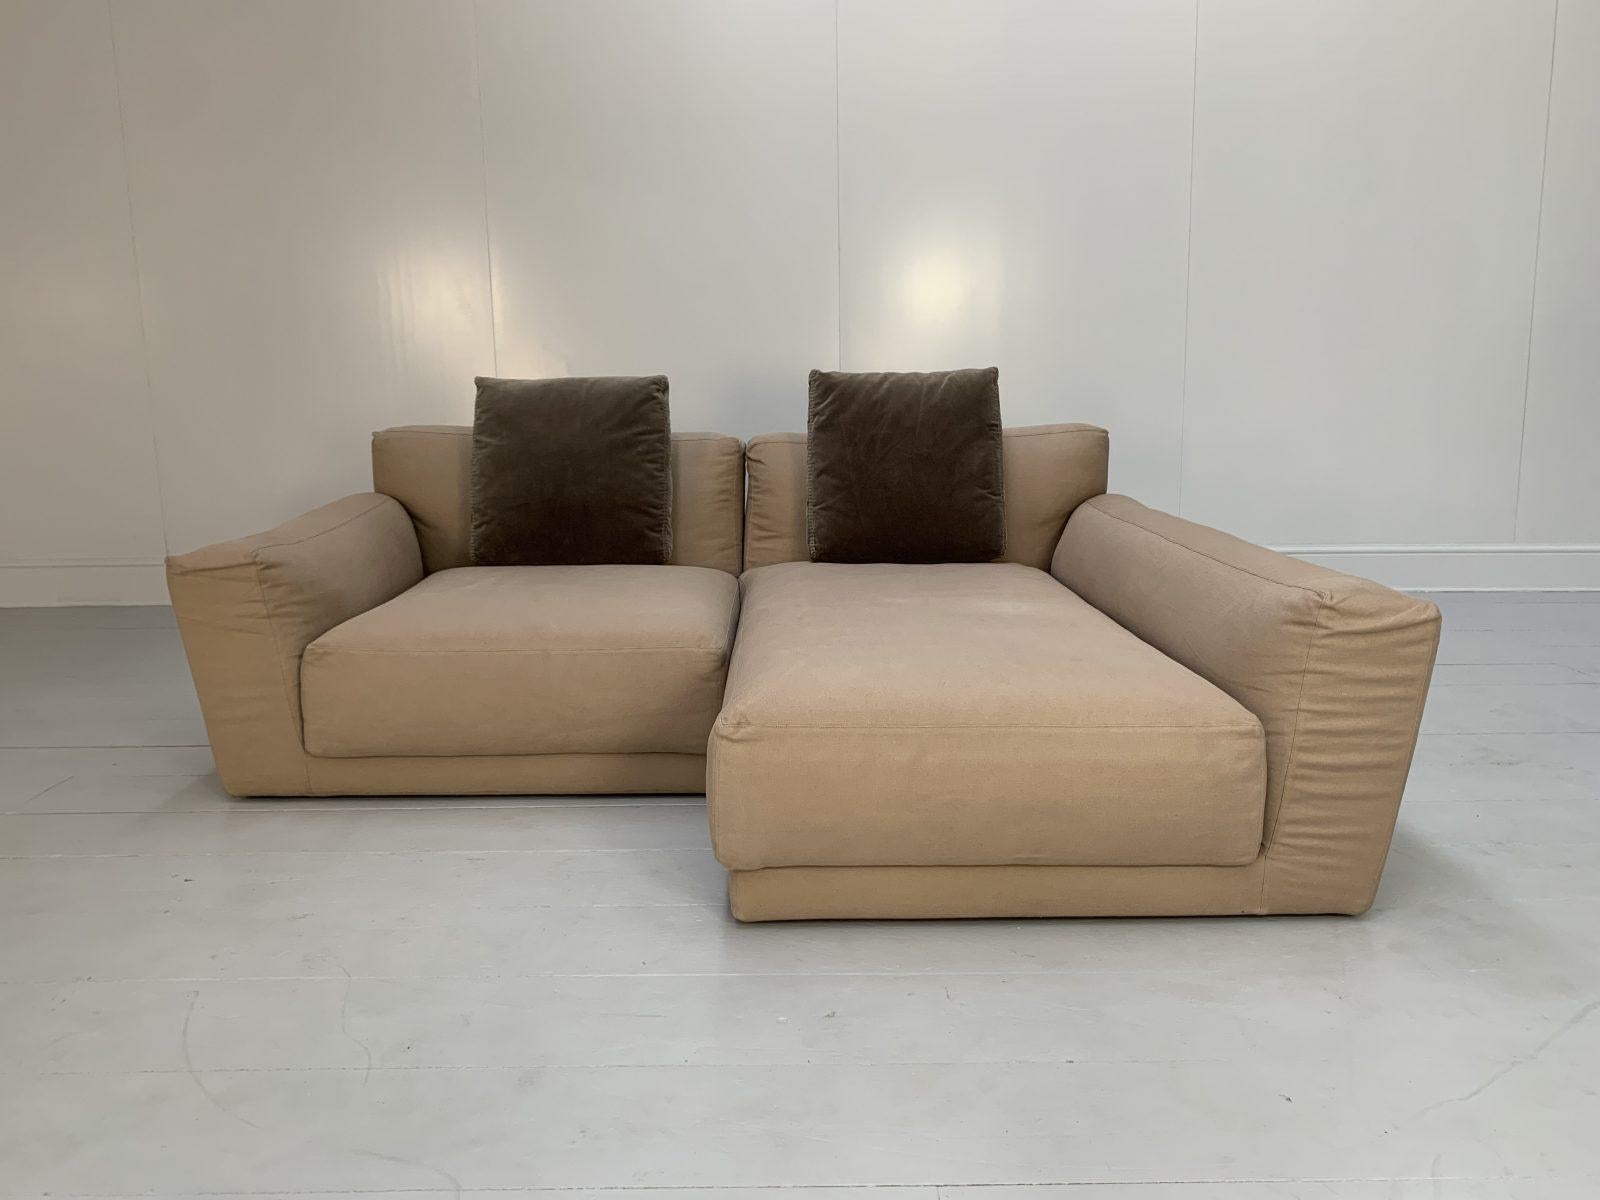 Hello Friends, and welcome to another unmissable offering from Lord Browns Furniture, the UK’s premier resource for fine Sofas and Chairs.

On offer on this occasion is an iconic “Luis” 4-Seat Sectional Sofa from the world renown Italian furniture